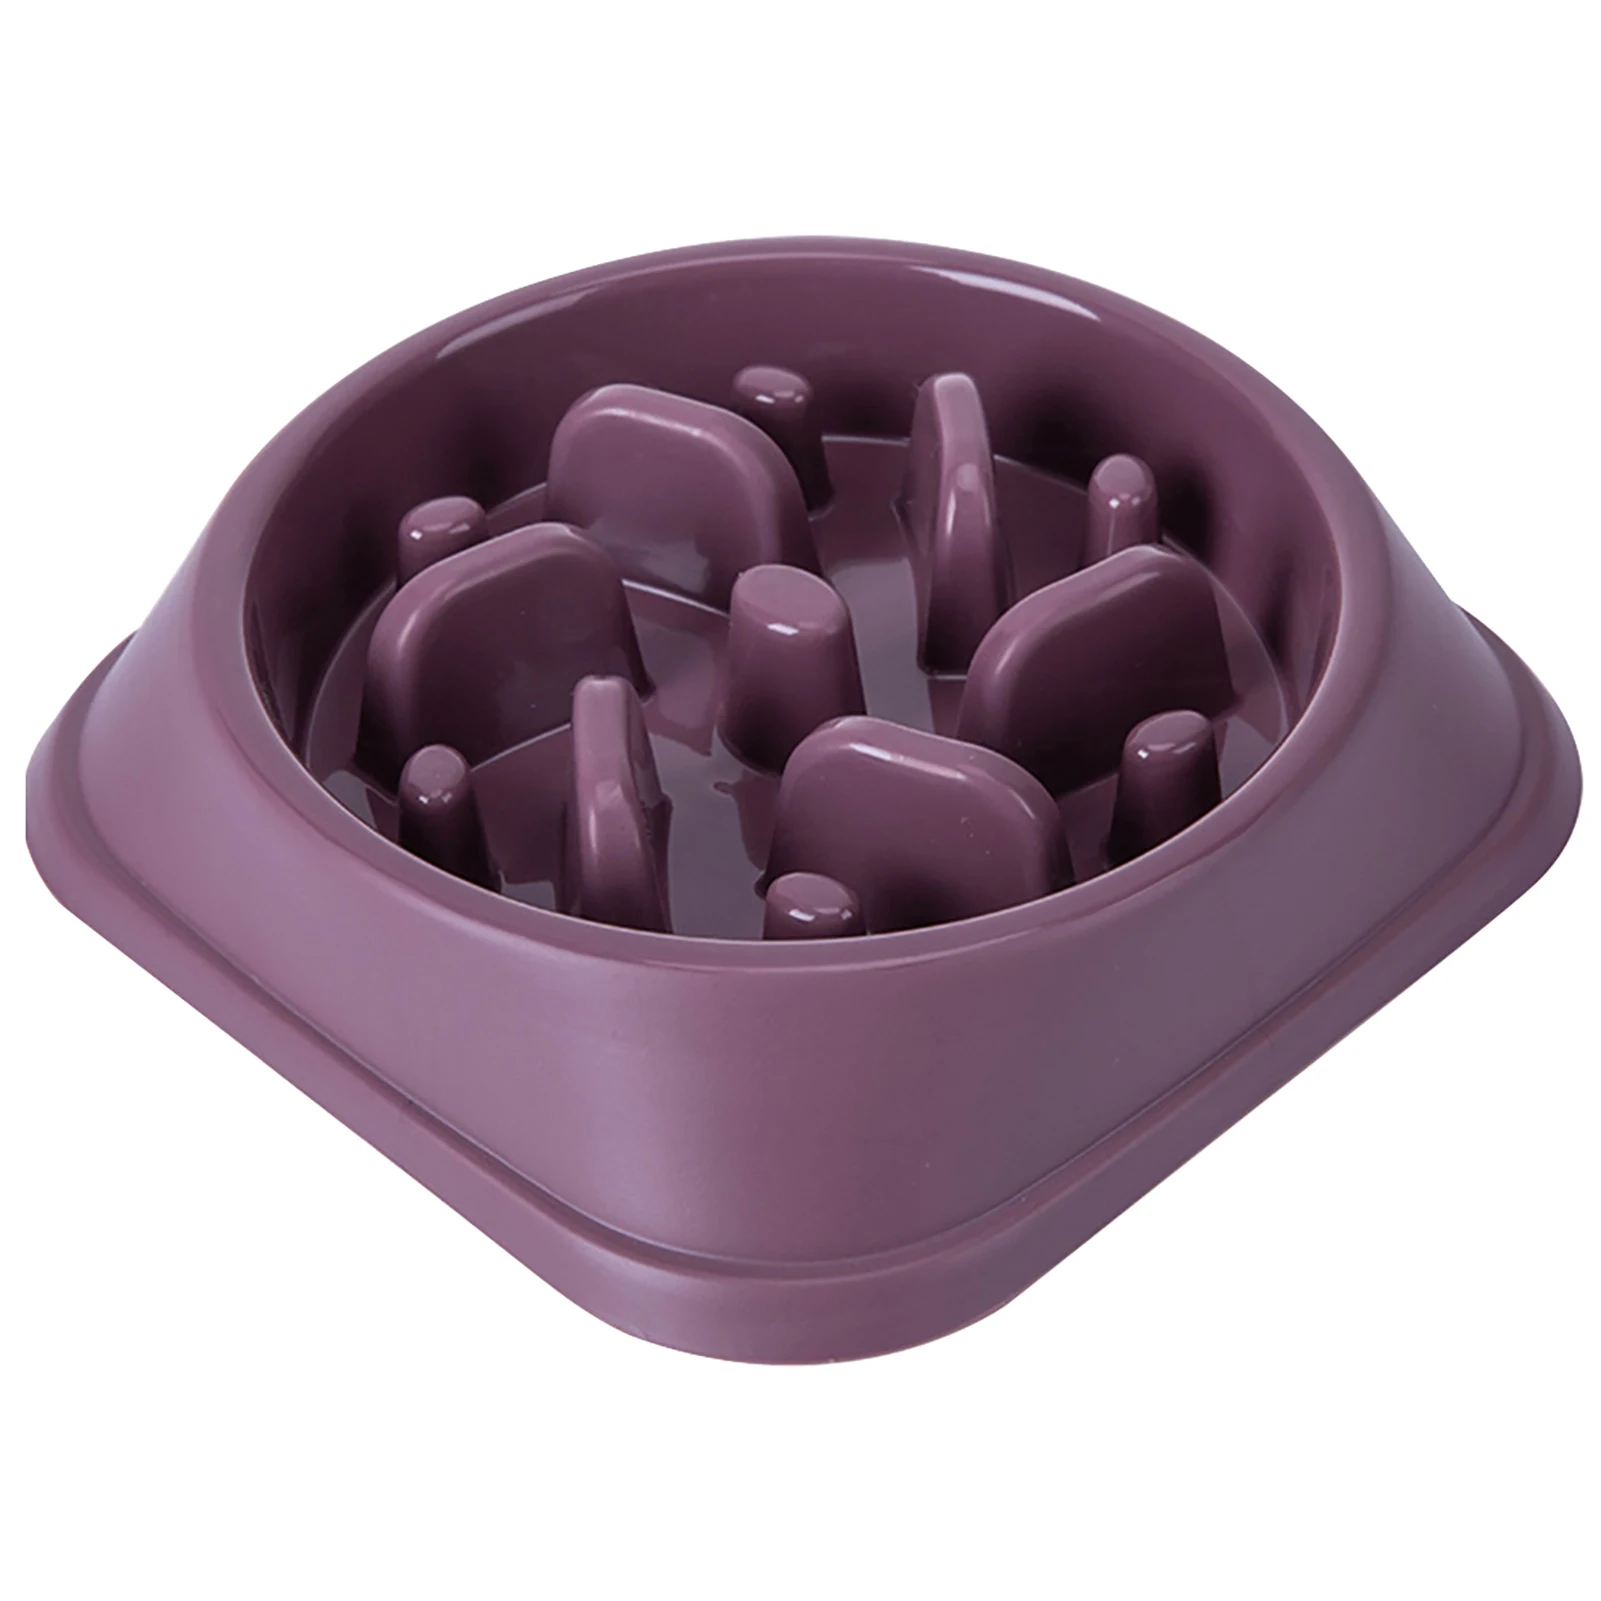 

Food Eating Prevent Choking Home Non Slip Anti-Gulping PP Healthy Slow Feeder Bowl Dish Durable Puppy Pet Dog Smooth